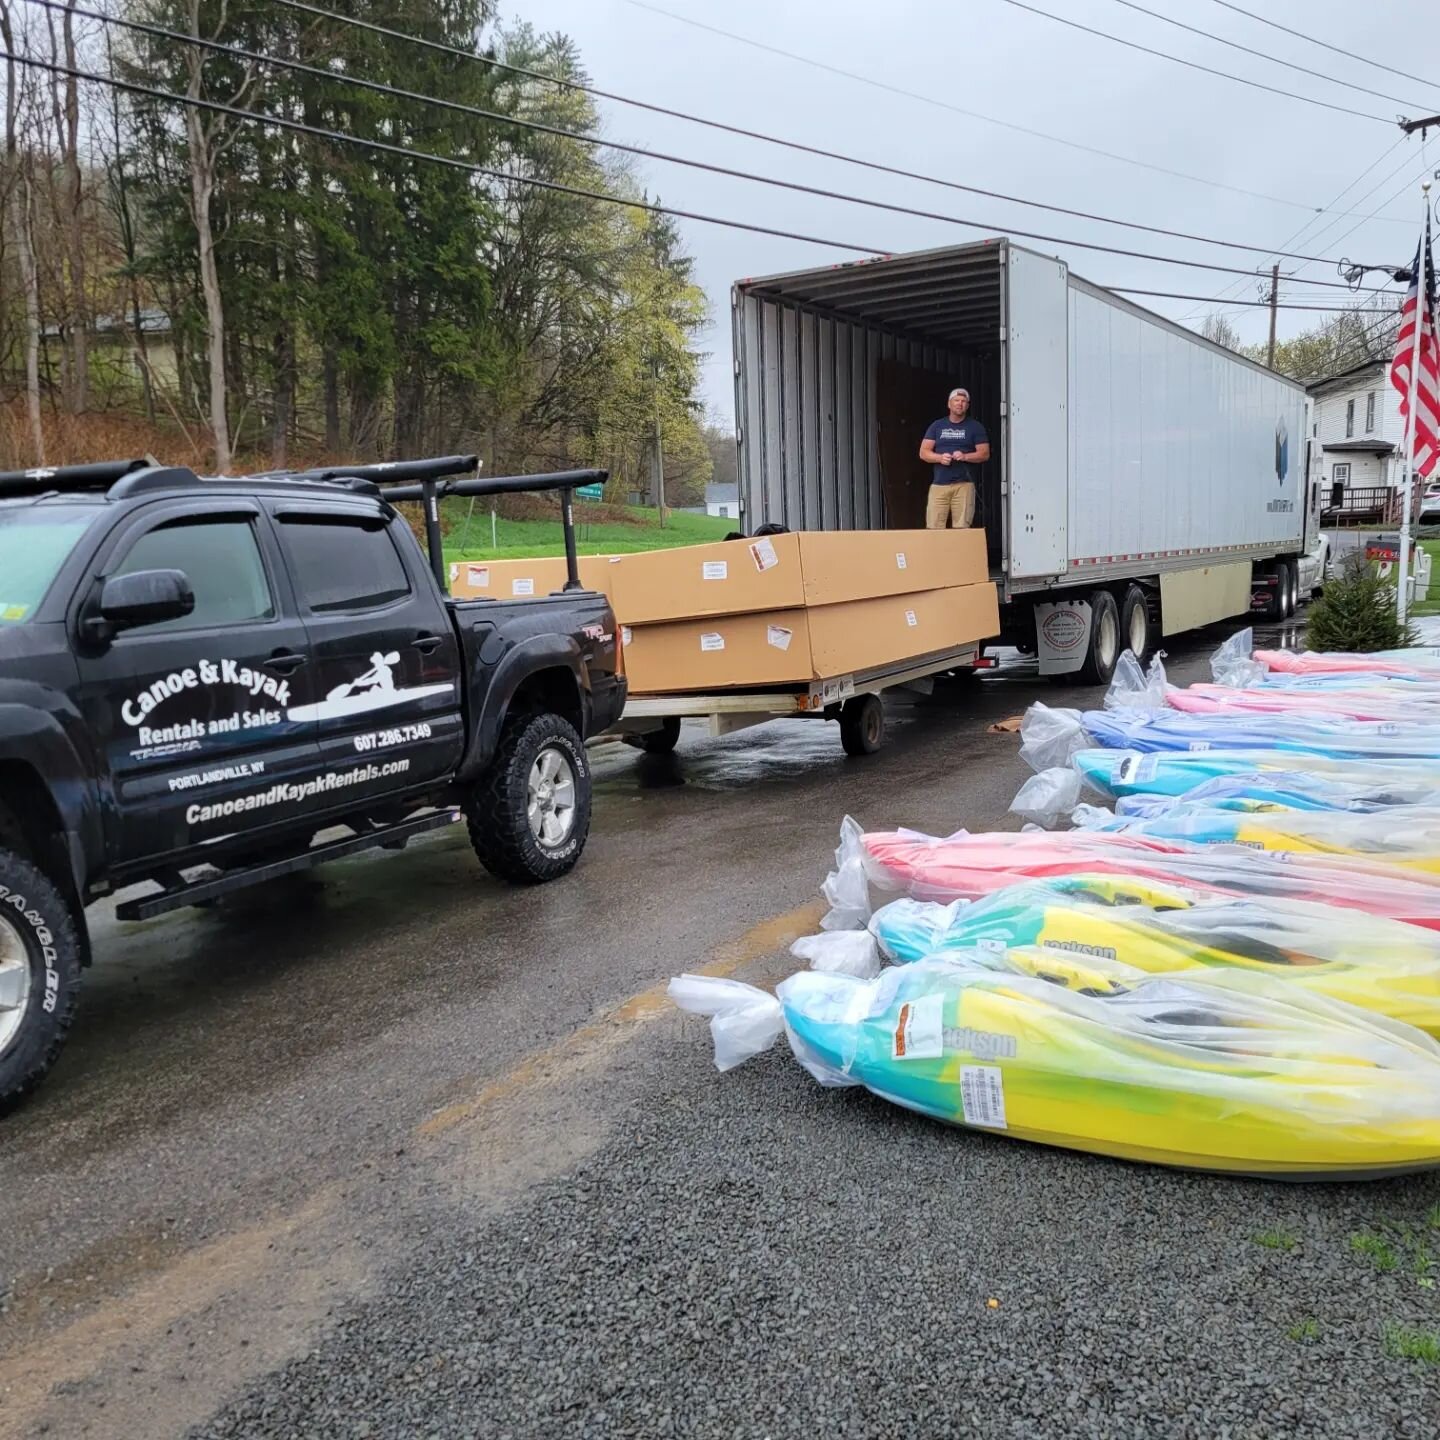 A HUGE thank you to our Jackson Kayak rep @rob.yager.mooseriver for saving the day and helping us unload our first load of Jackson Kayak Whitewater boats. 
&bull;
Now in stock: Antix 2.0, Gnarvana, Rock Star V, and Karma traverse 10. In the fishing c